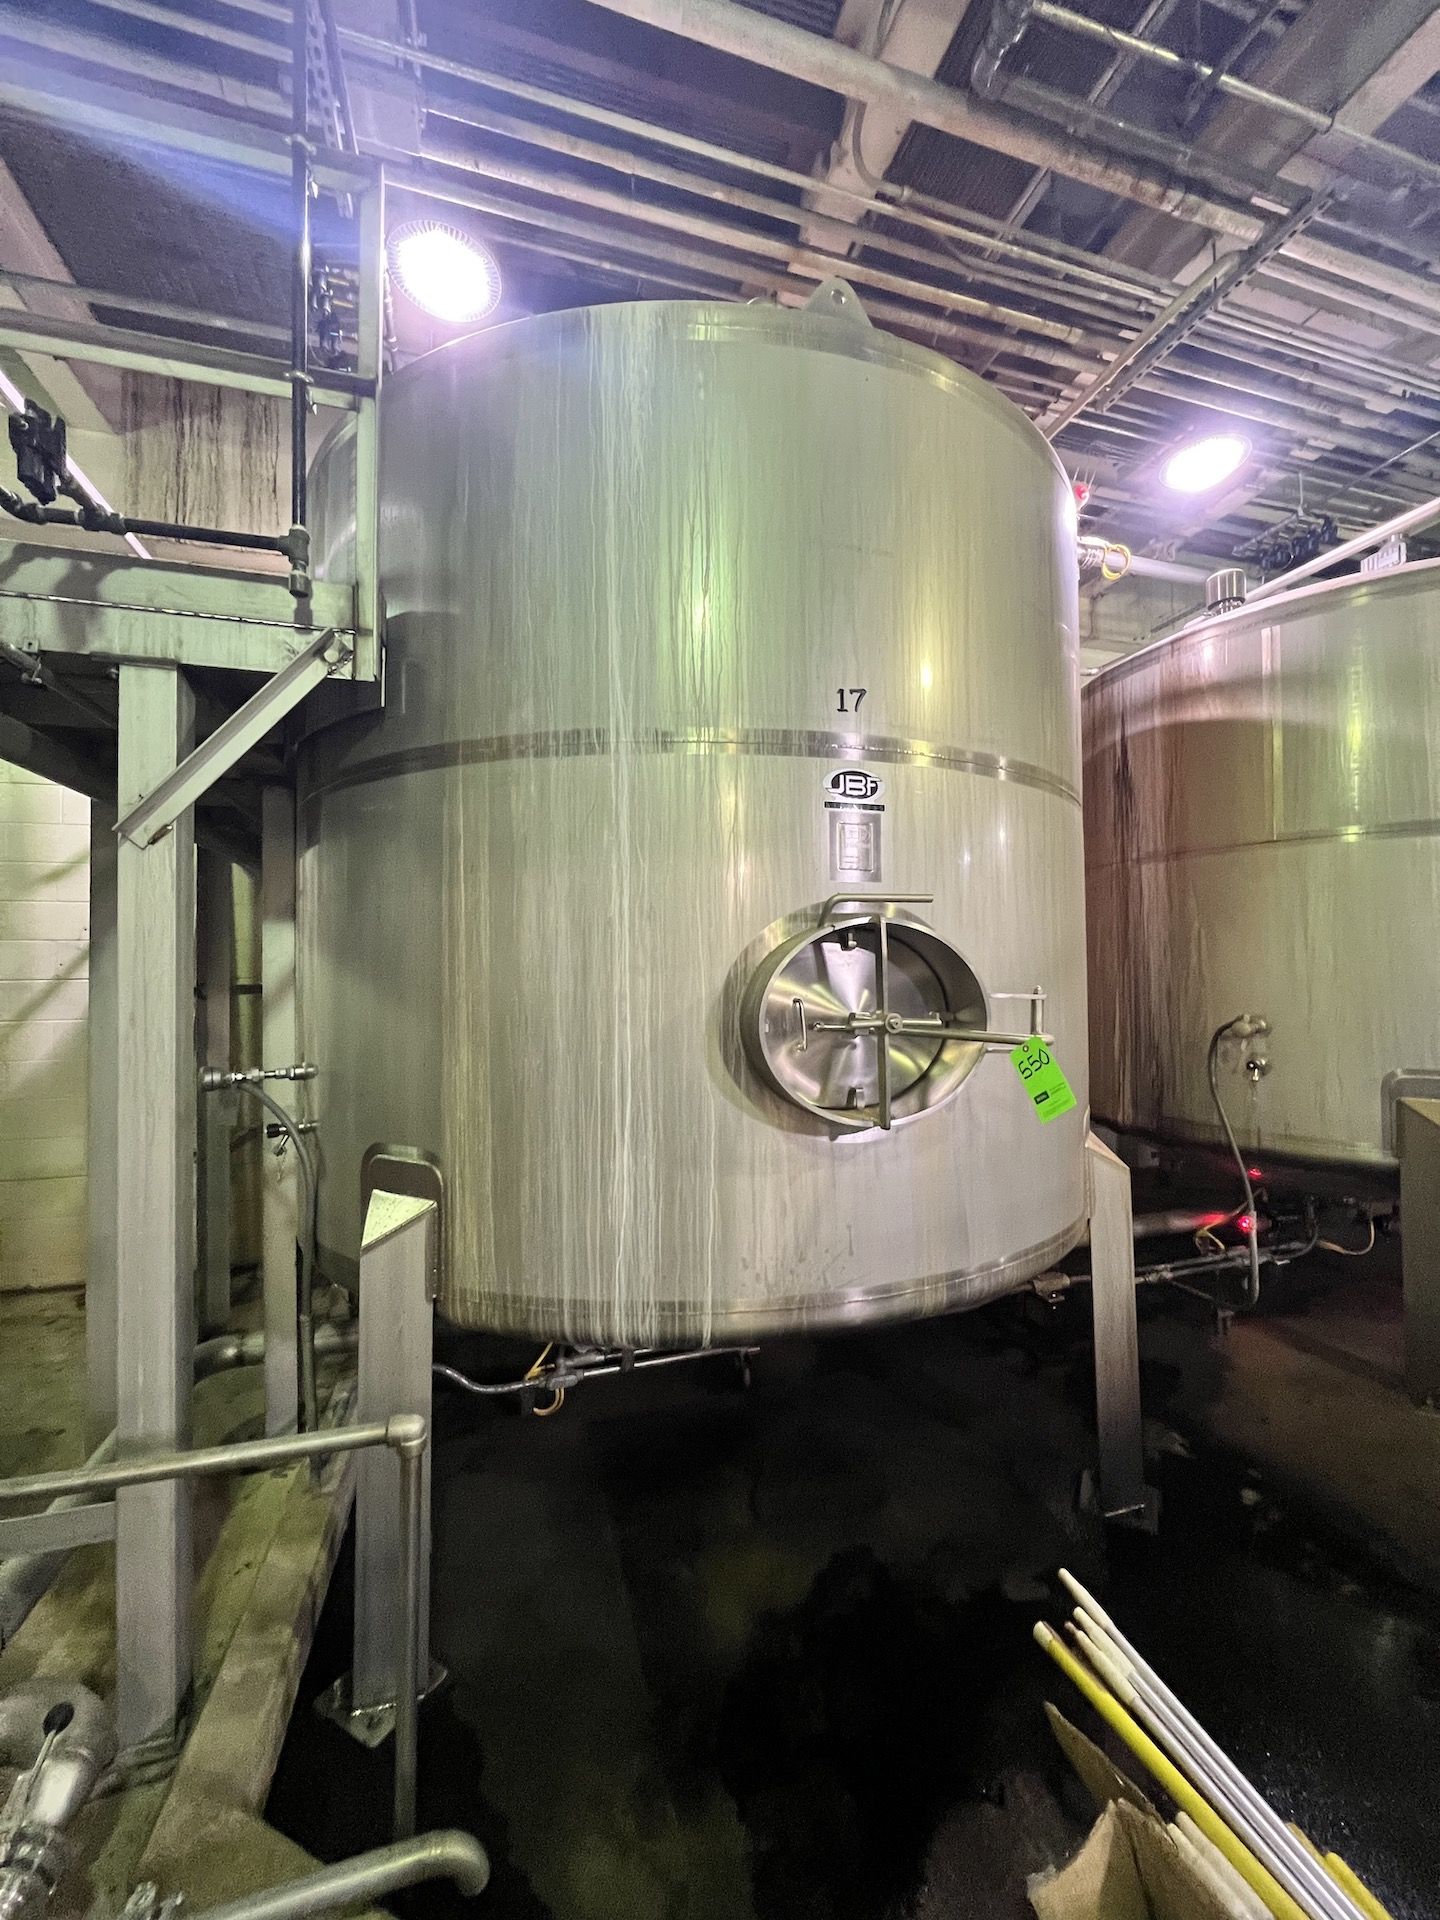 2019 JBF 3,780 GALLON S/S MIXING TANK, S/N 19948, TOP-MOUNT PROP STYLE AGITATION, APPROX. 108 IN.